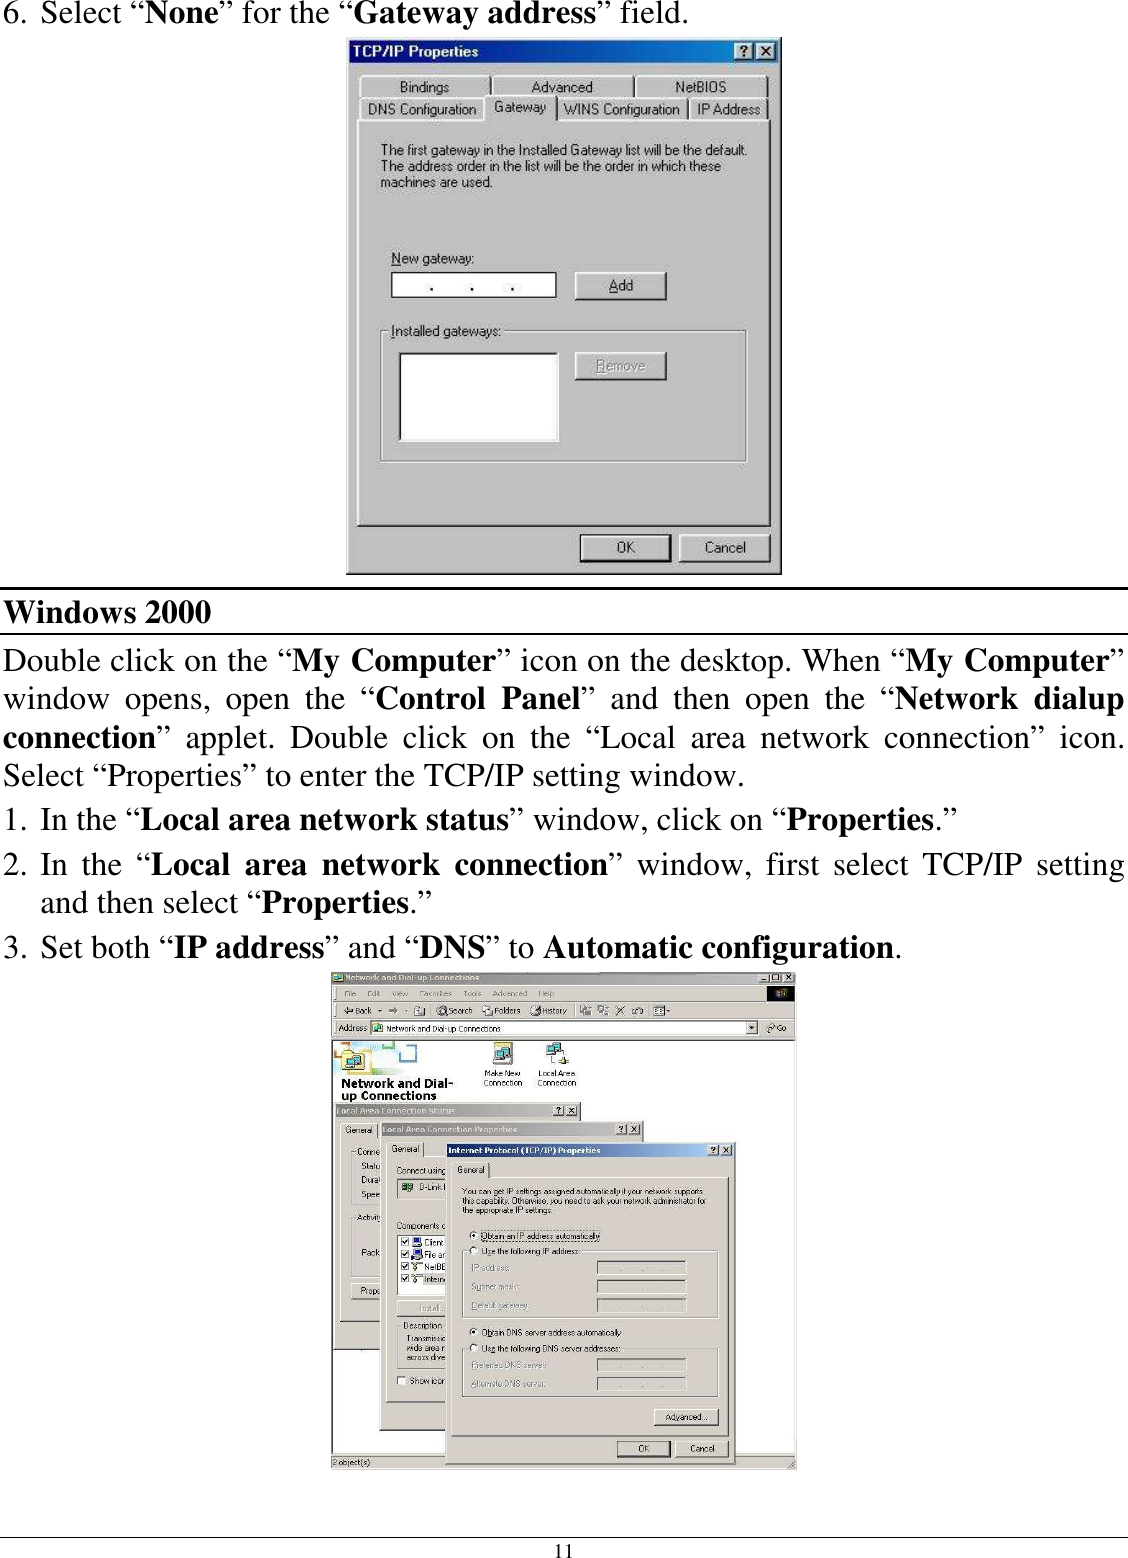 11 6. Select “None” for the “Gateway address” field.  Windows 2000 Double click on the “My Computer” icon on the desktop. When “My Computer” window  opens,  open  the  “Control  Panel”  and  then  open  the  “Network  dialup connection”  applet.  Double  click  on  the  “Local  area  network  connection”  icon. Select “Properties” to enter the TCP/IP setting window. 1. In the “Local area network status” window, click on “Properties.” 2. In  the  “Local  area  network  connection”  window,  first  select  TCP/IP  setting and then select “Properties.” 3. Set both “IP address” and “DNS” to Automatic configuration.  